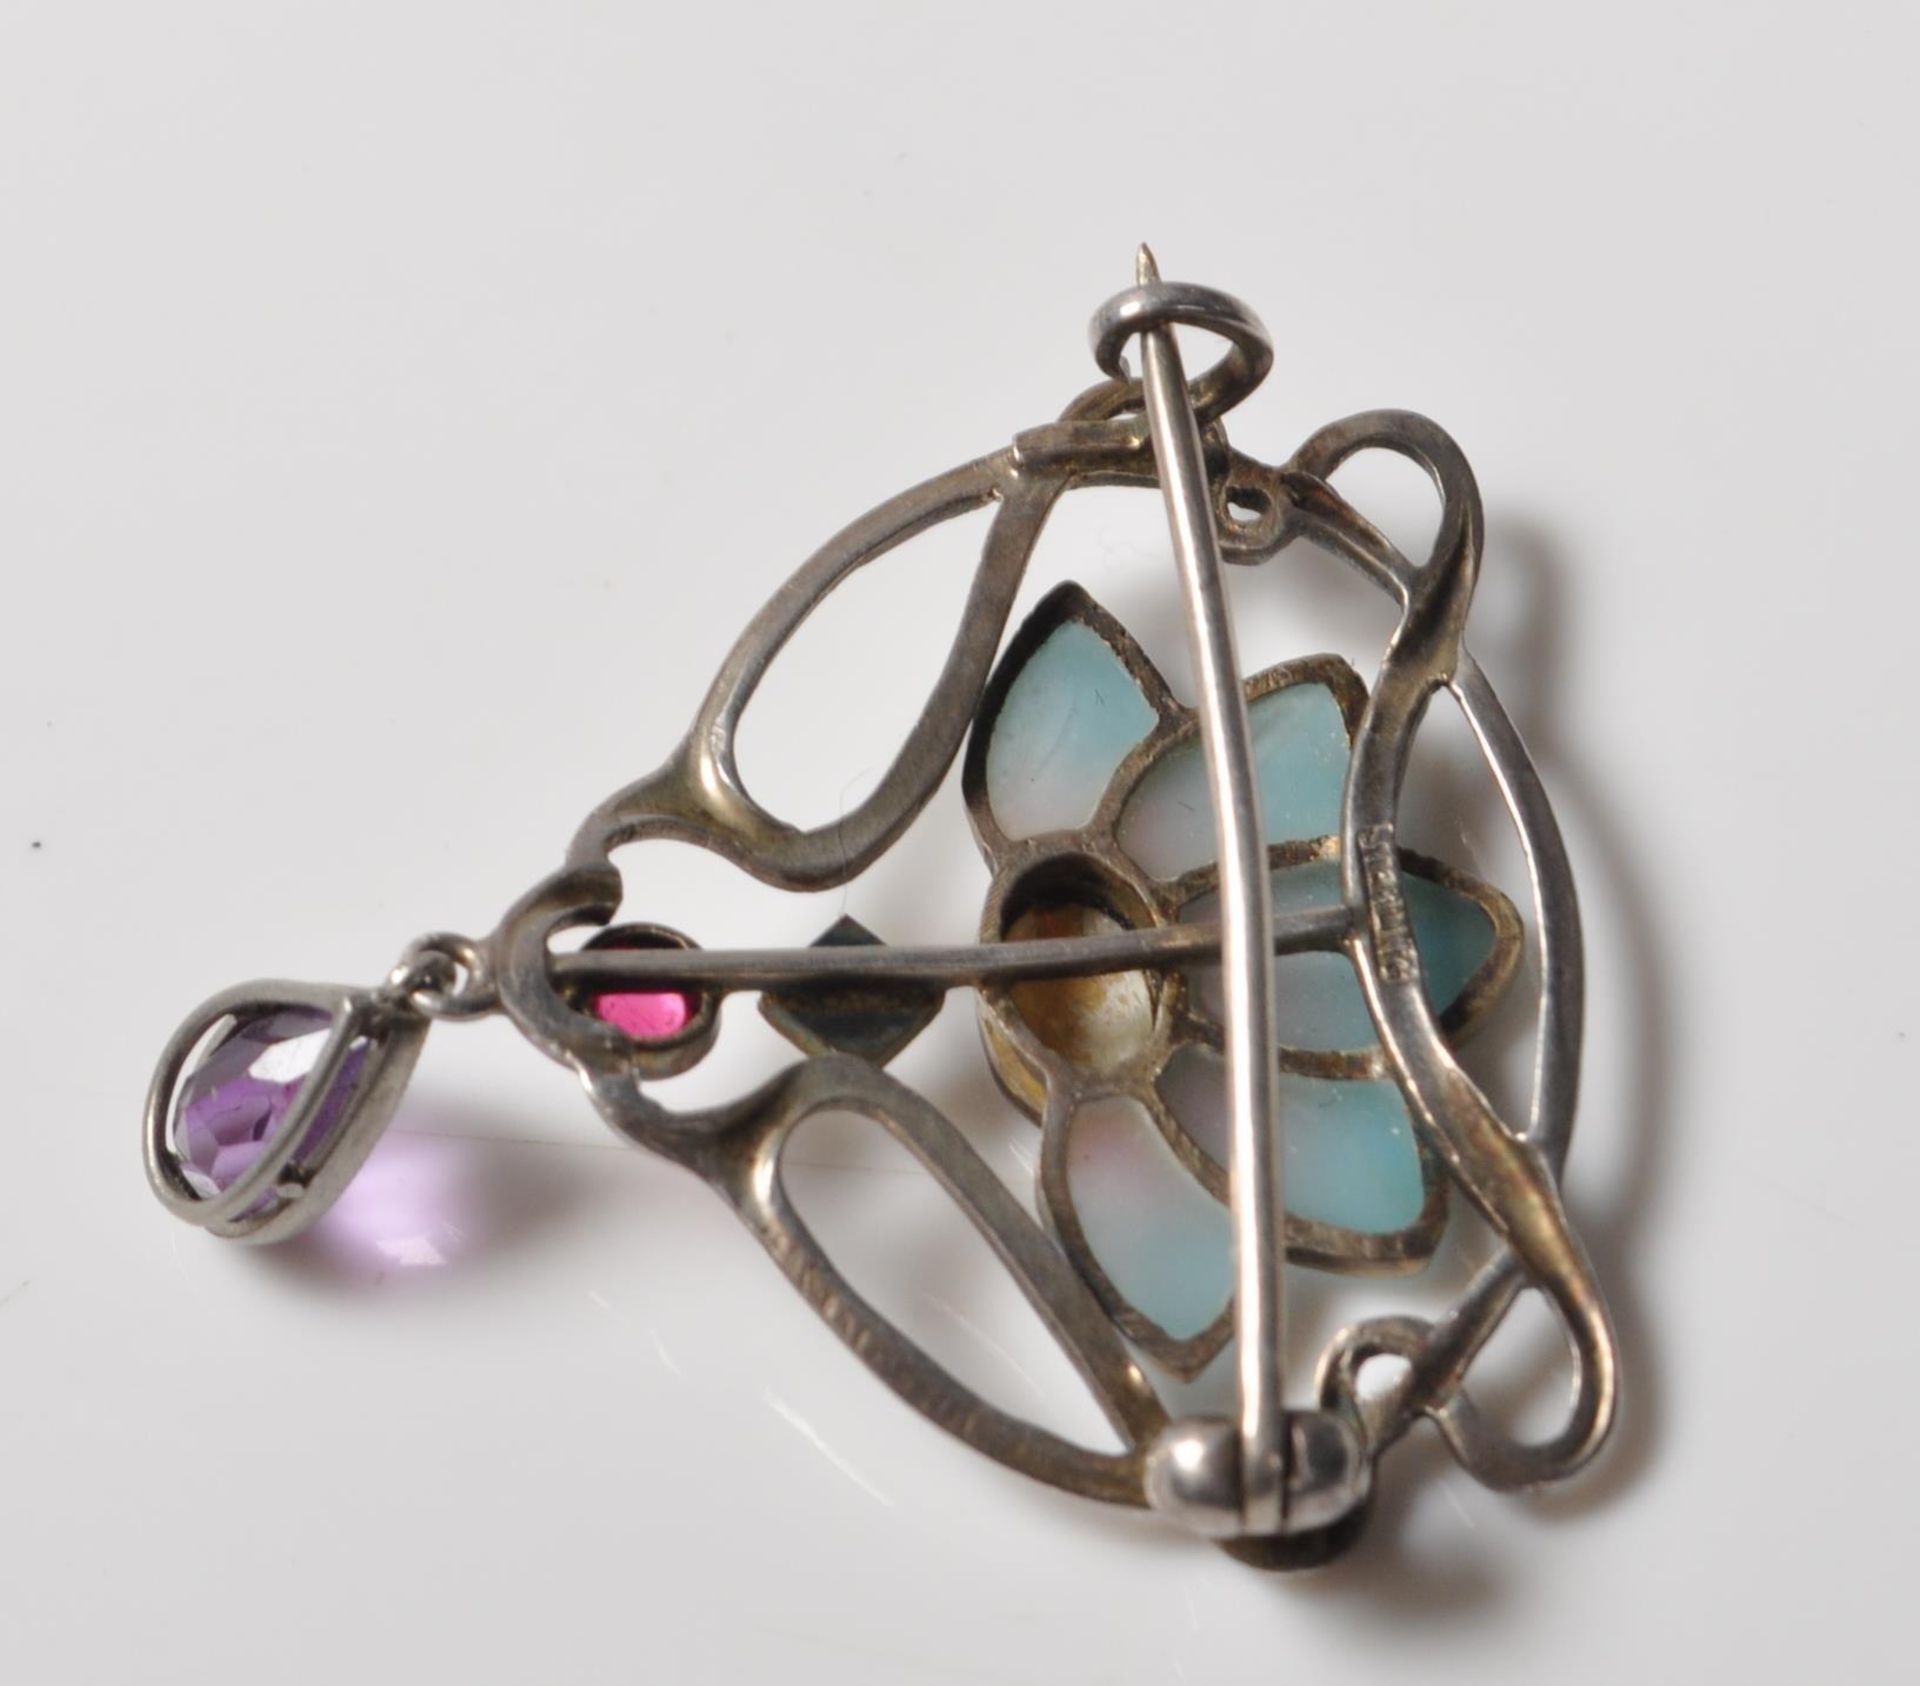 ART NOUVEAU SILVER AND PILQIE A JOUR BROOCH - Image 5 of 6